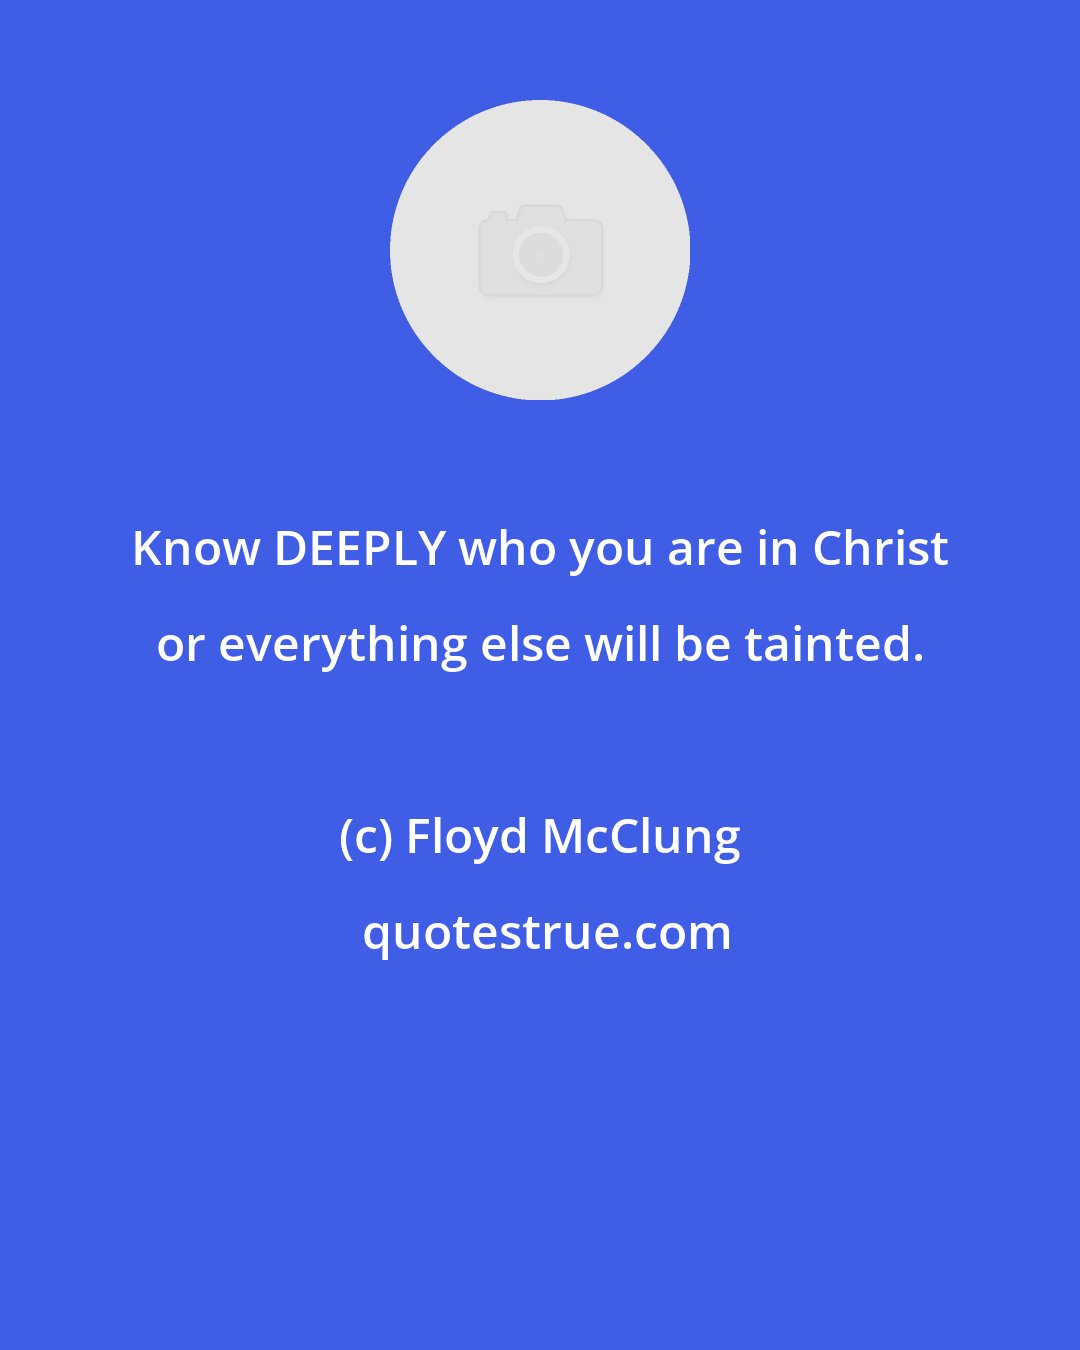 Floyd McClung: Know DEEPLY who you are in Christ or everything else will be tainted.